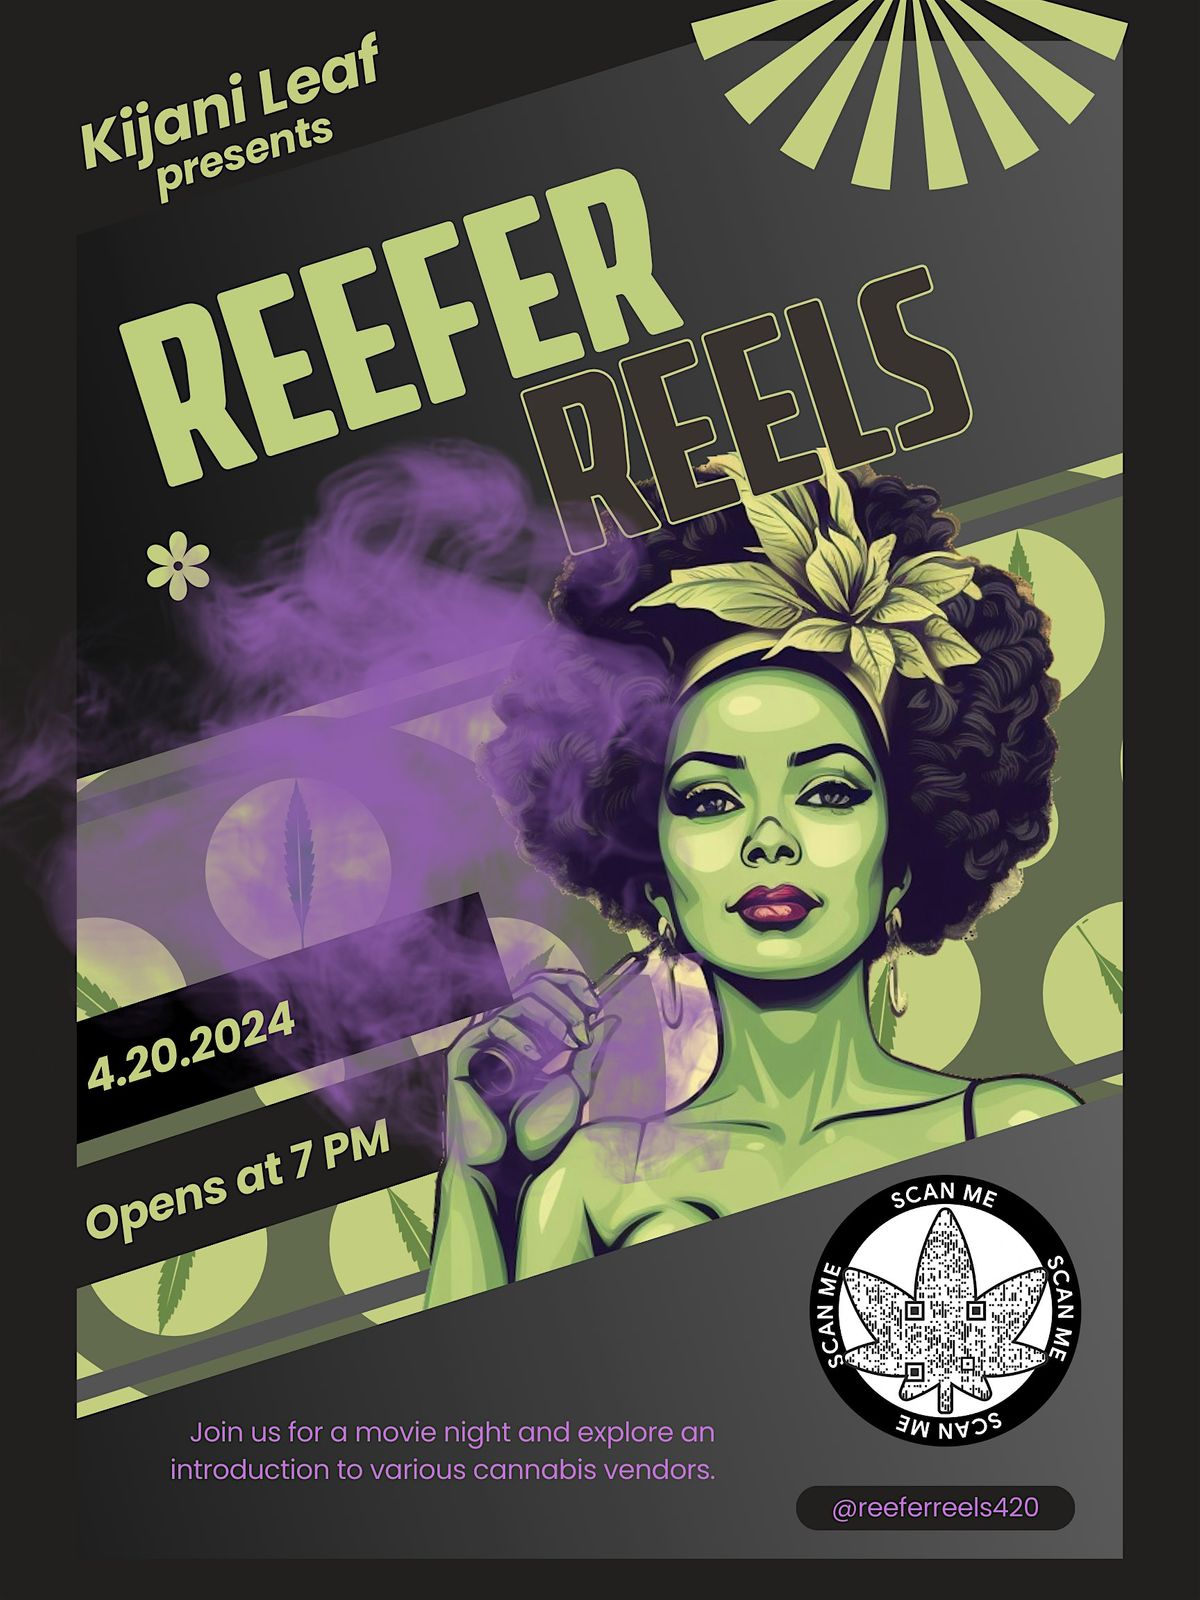 Reefer Reels: A Really High Movie Night